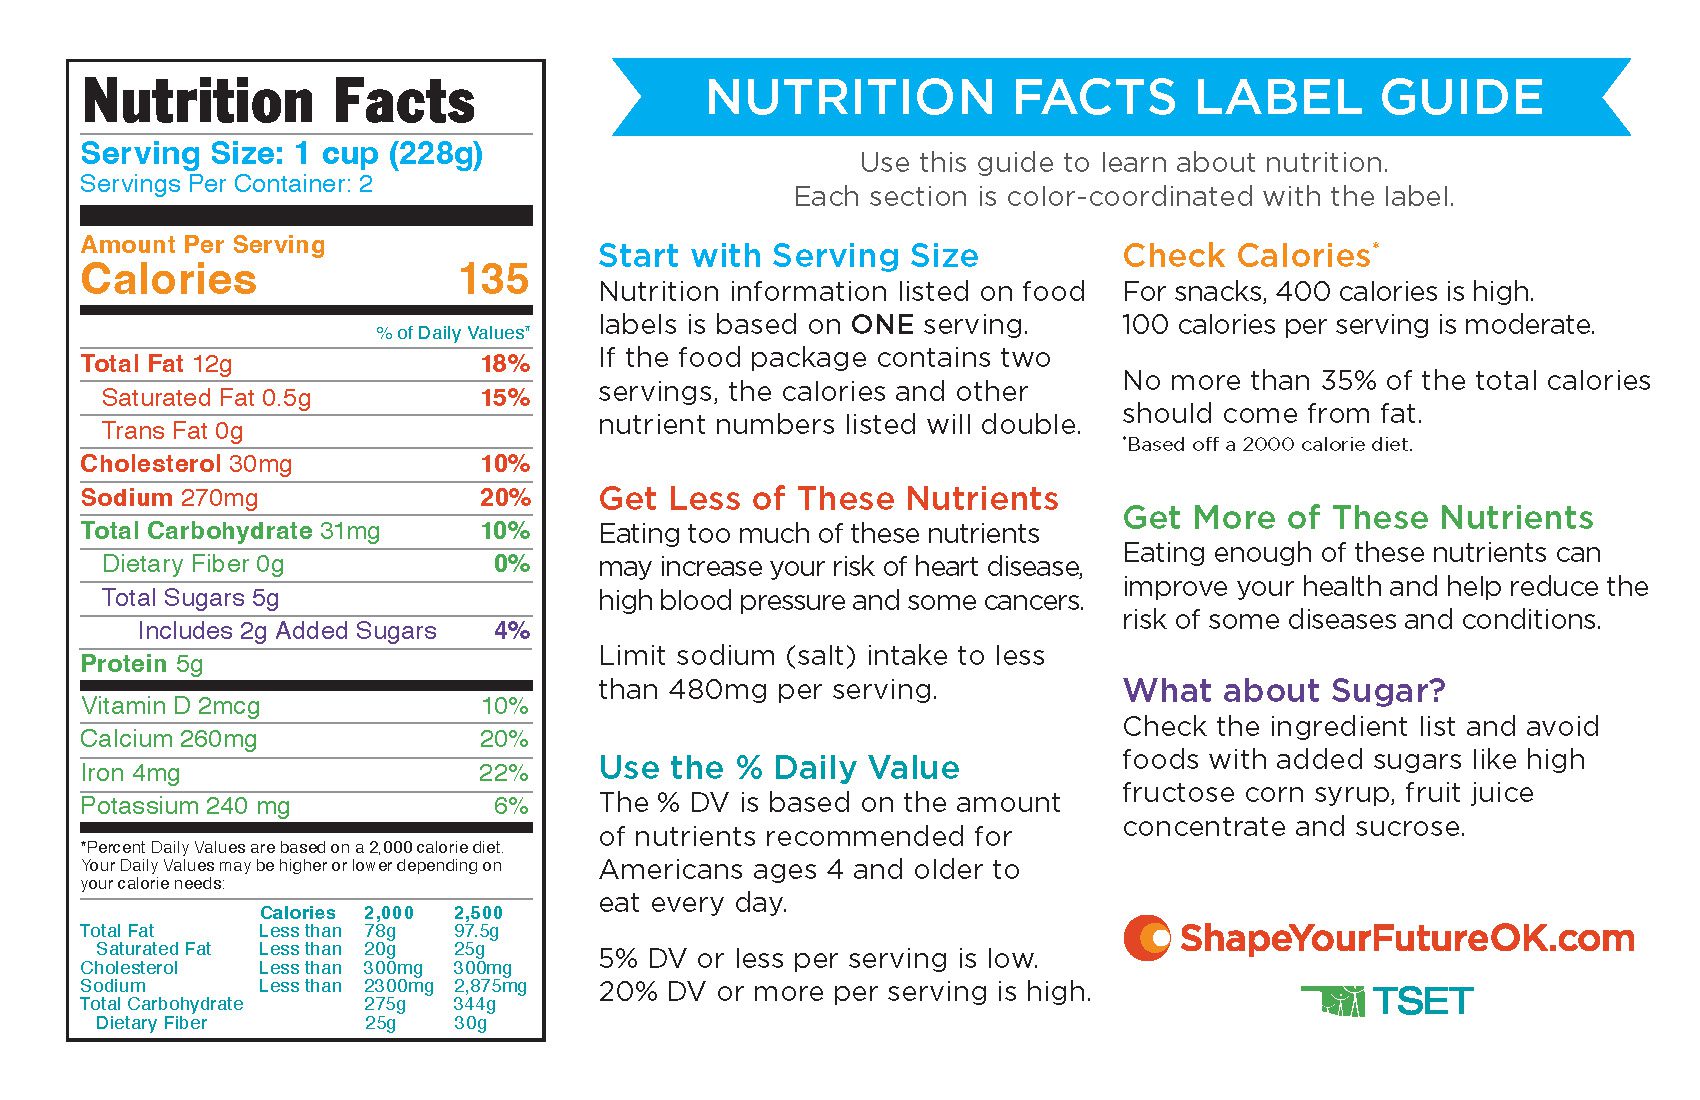 Nutrition facts label guide